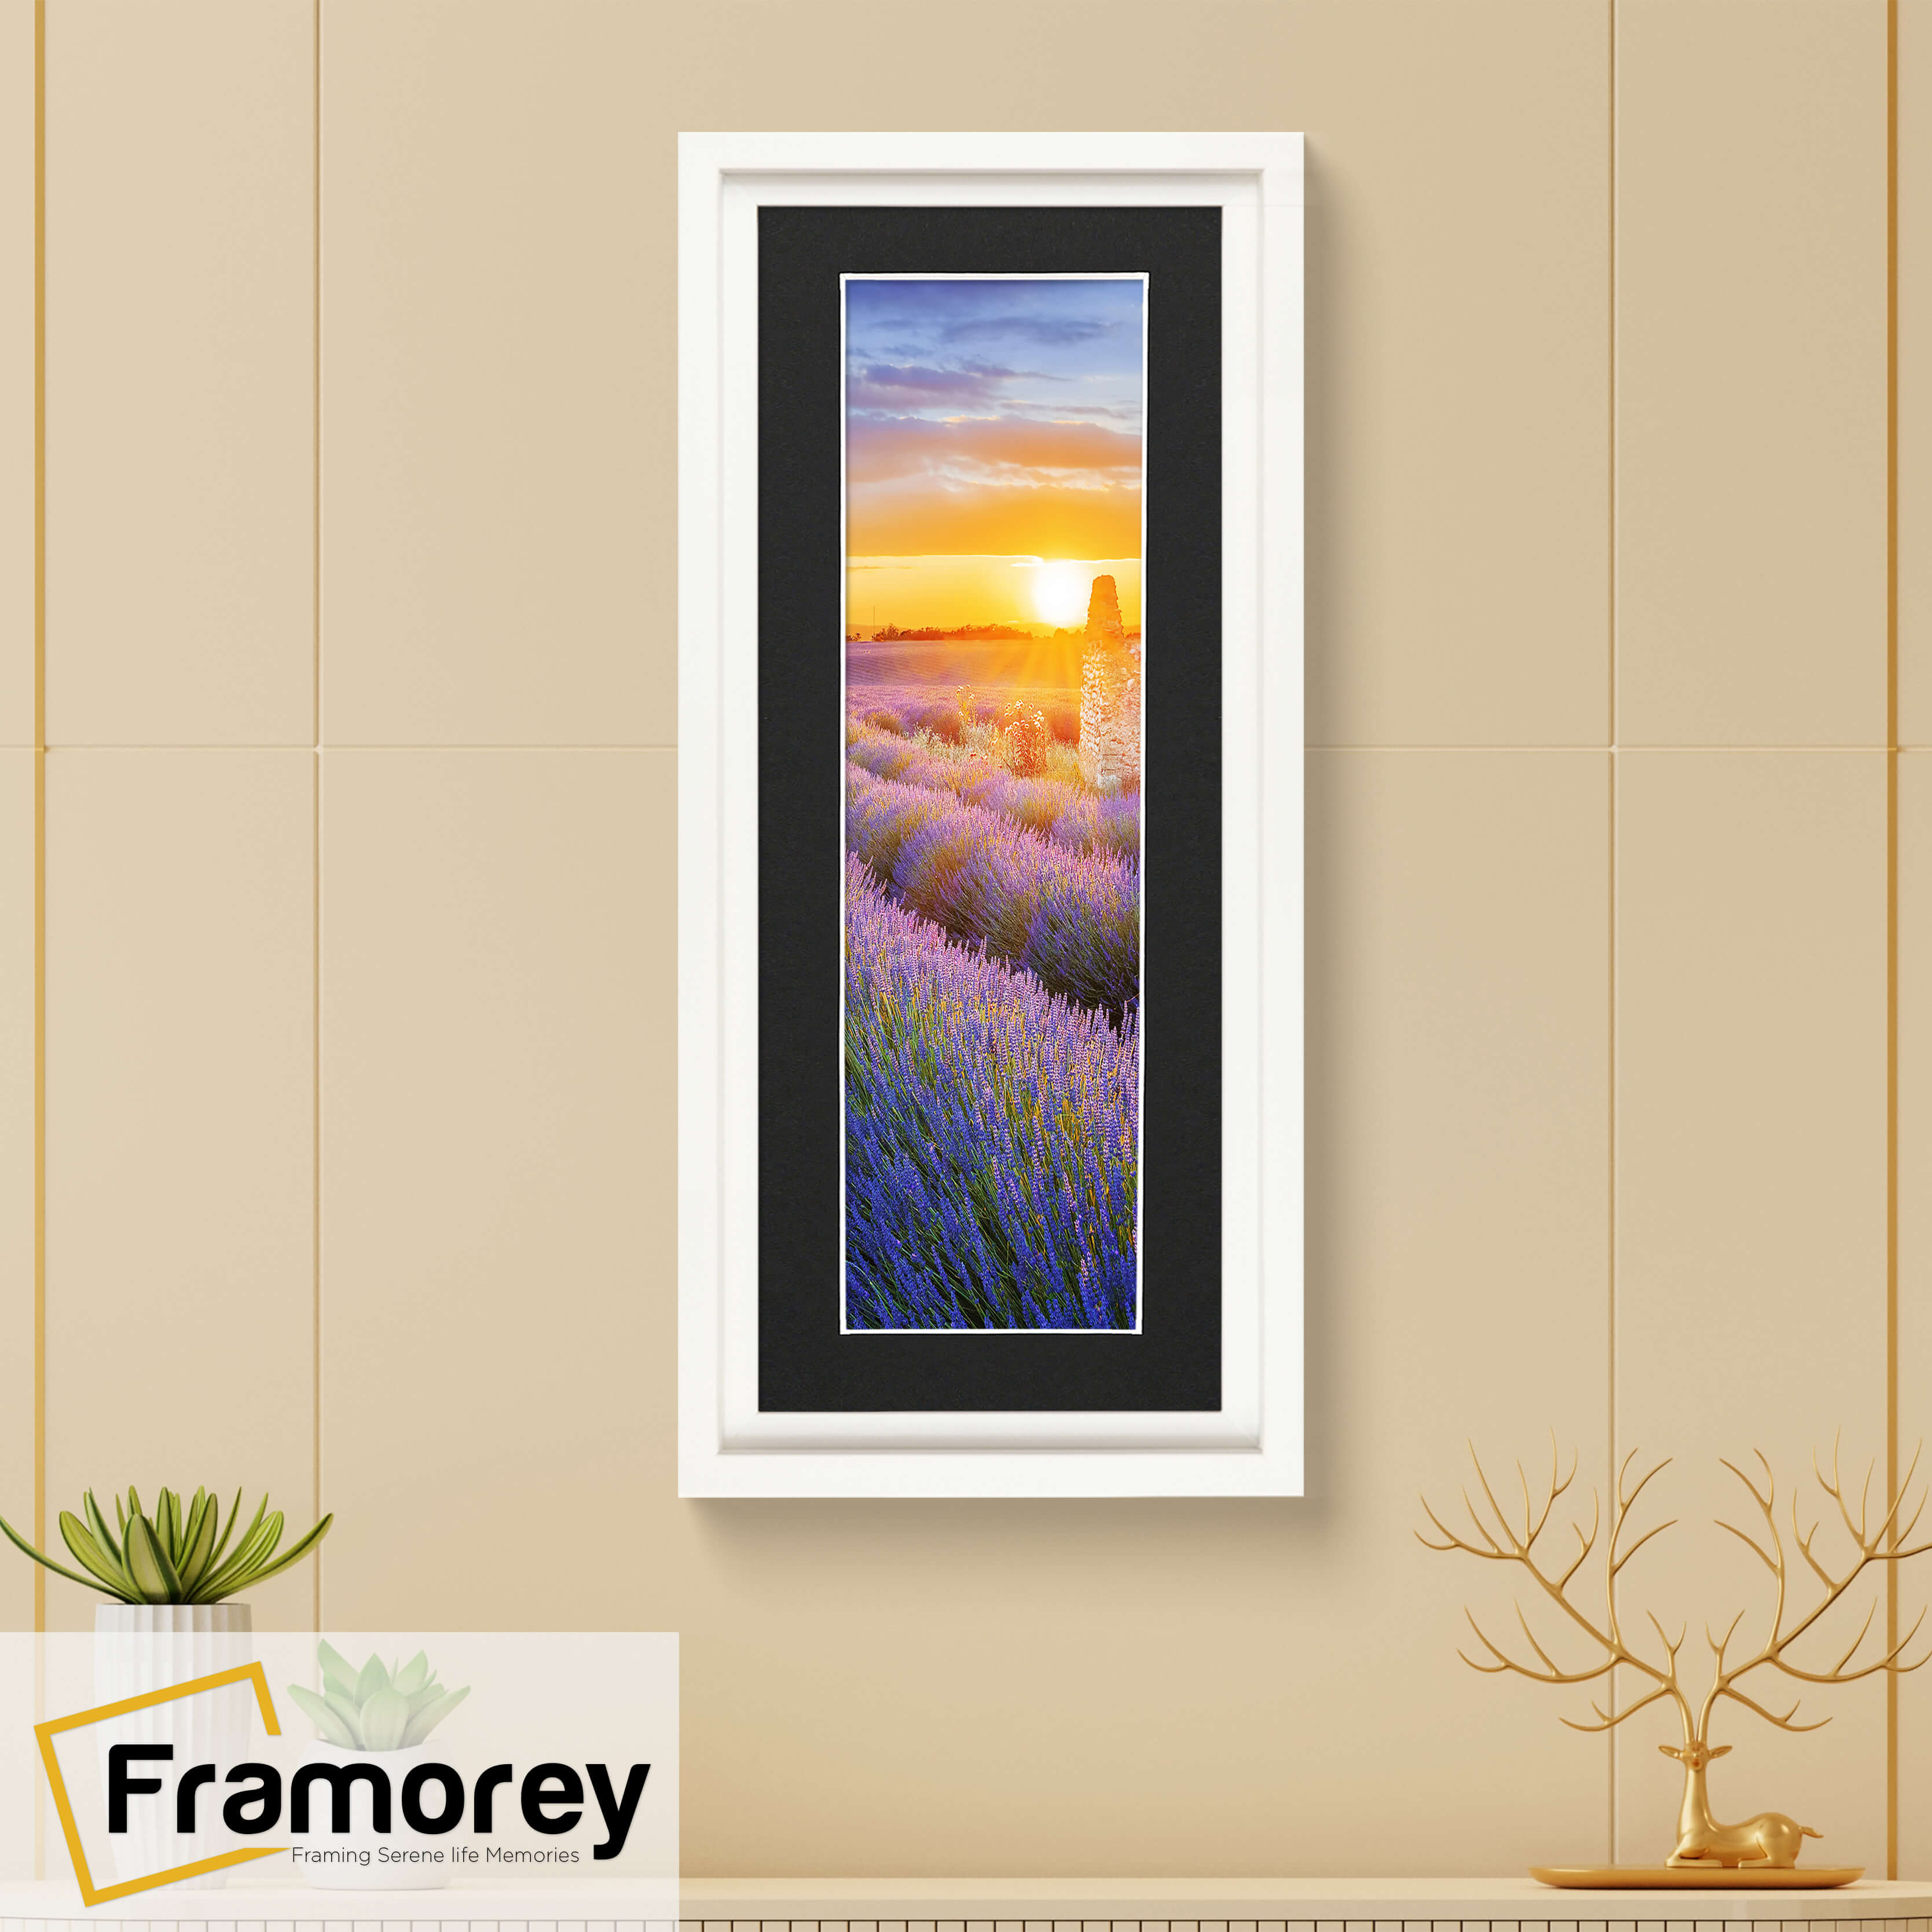 Panorama Style White Oslo Picture Frames With Black Mount